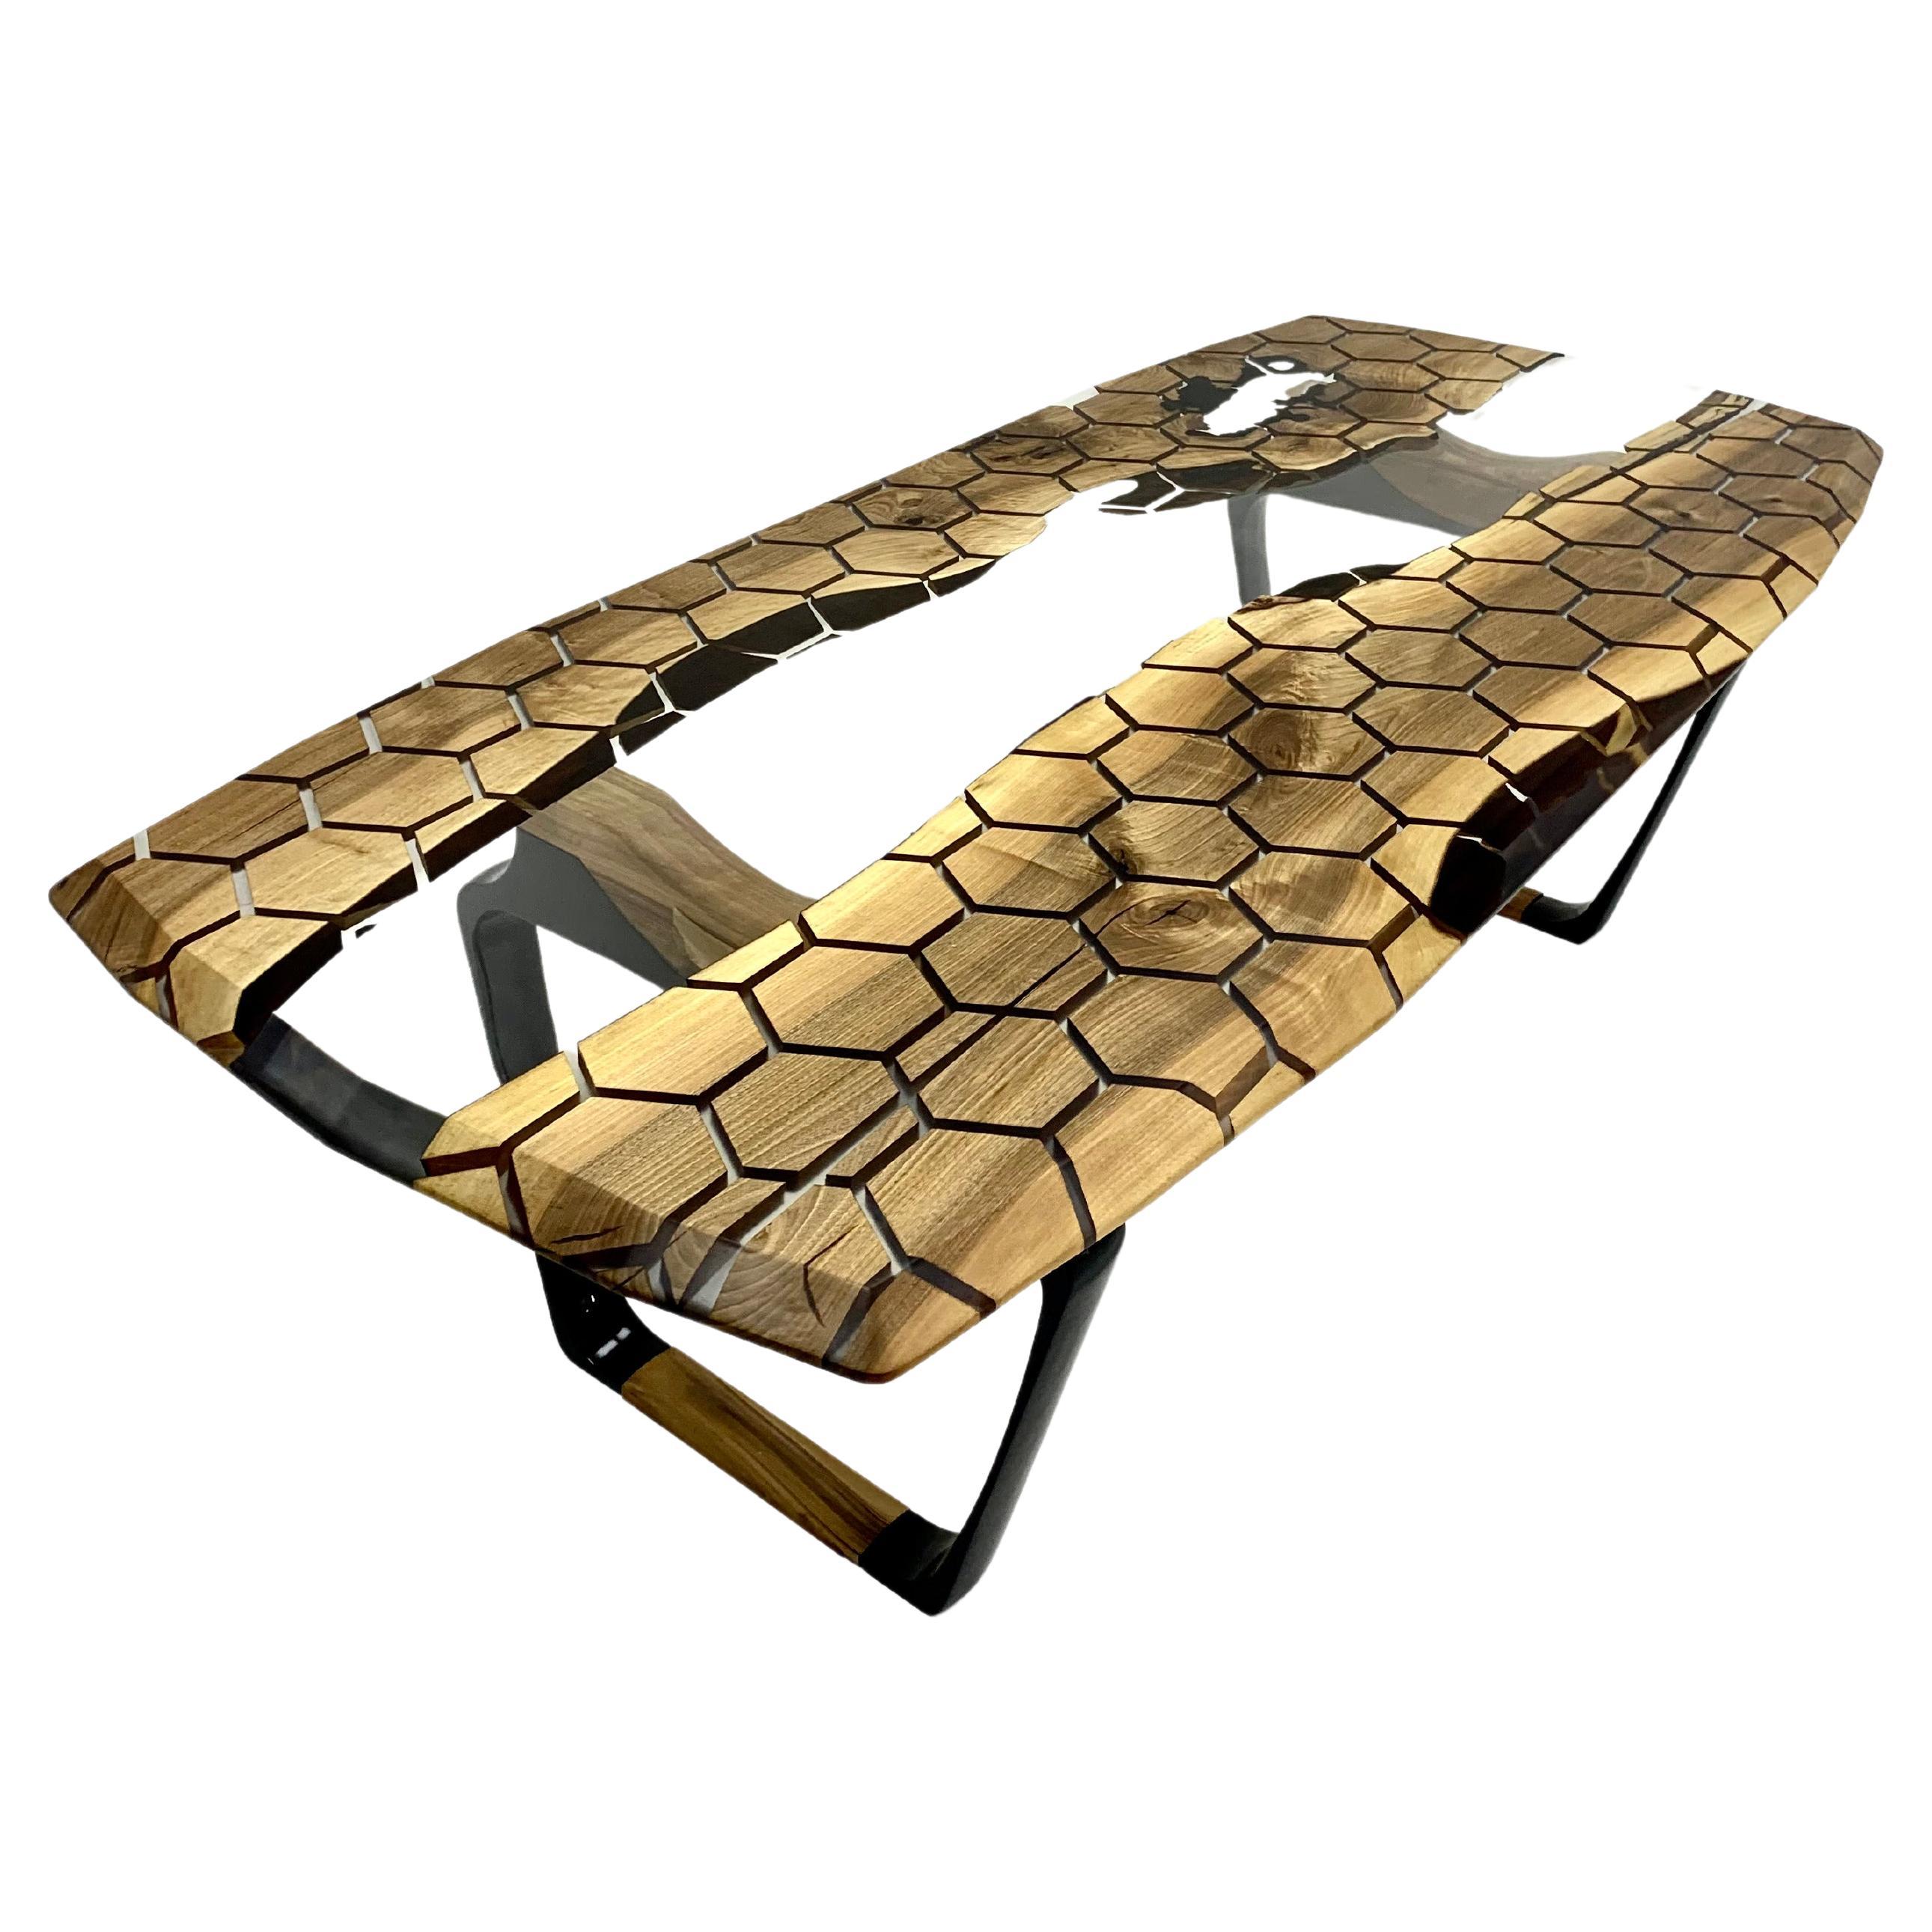 Honeycomb Epoxy Resin River Table

This epoxy table emerges as a unique work of art, inspired by nature's beauty. With its honeycomb pattern and hexagonal shapes, it offers an aesthetic delight. 

Custom sizes, colours and finishes are